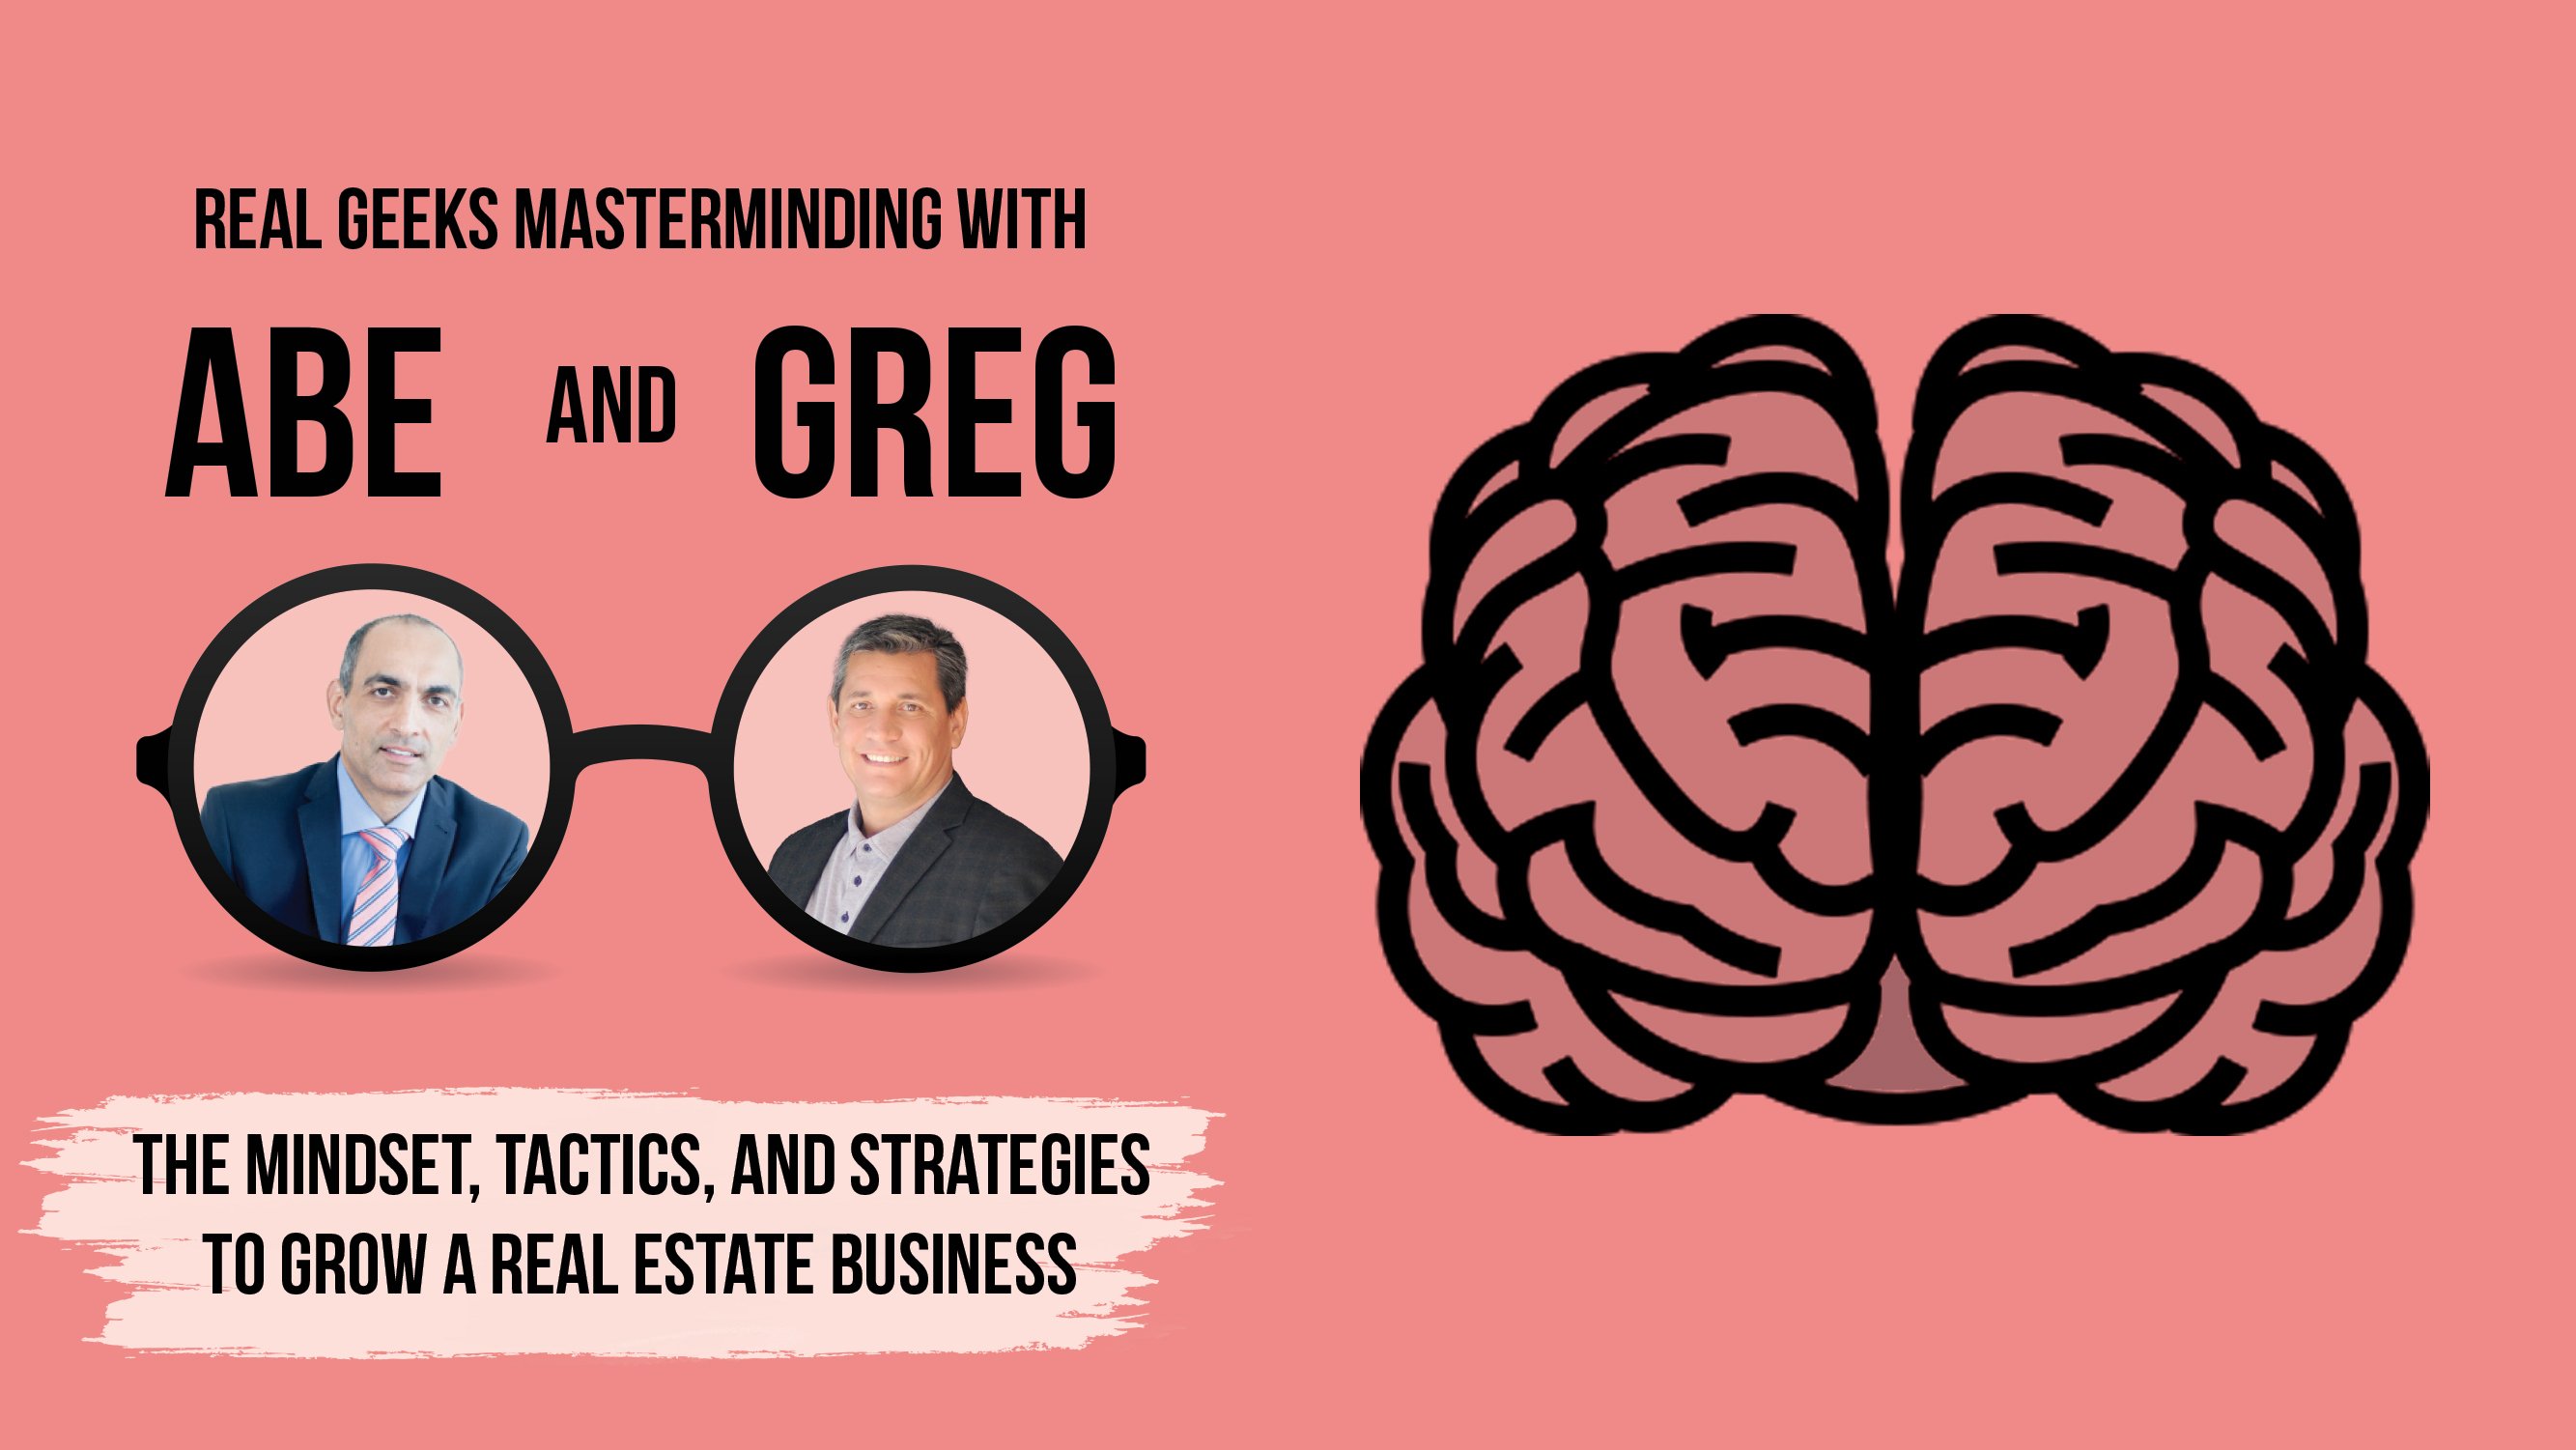 The Mindset, Tactics, and Strategies To Grow a Real Estate Business